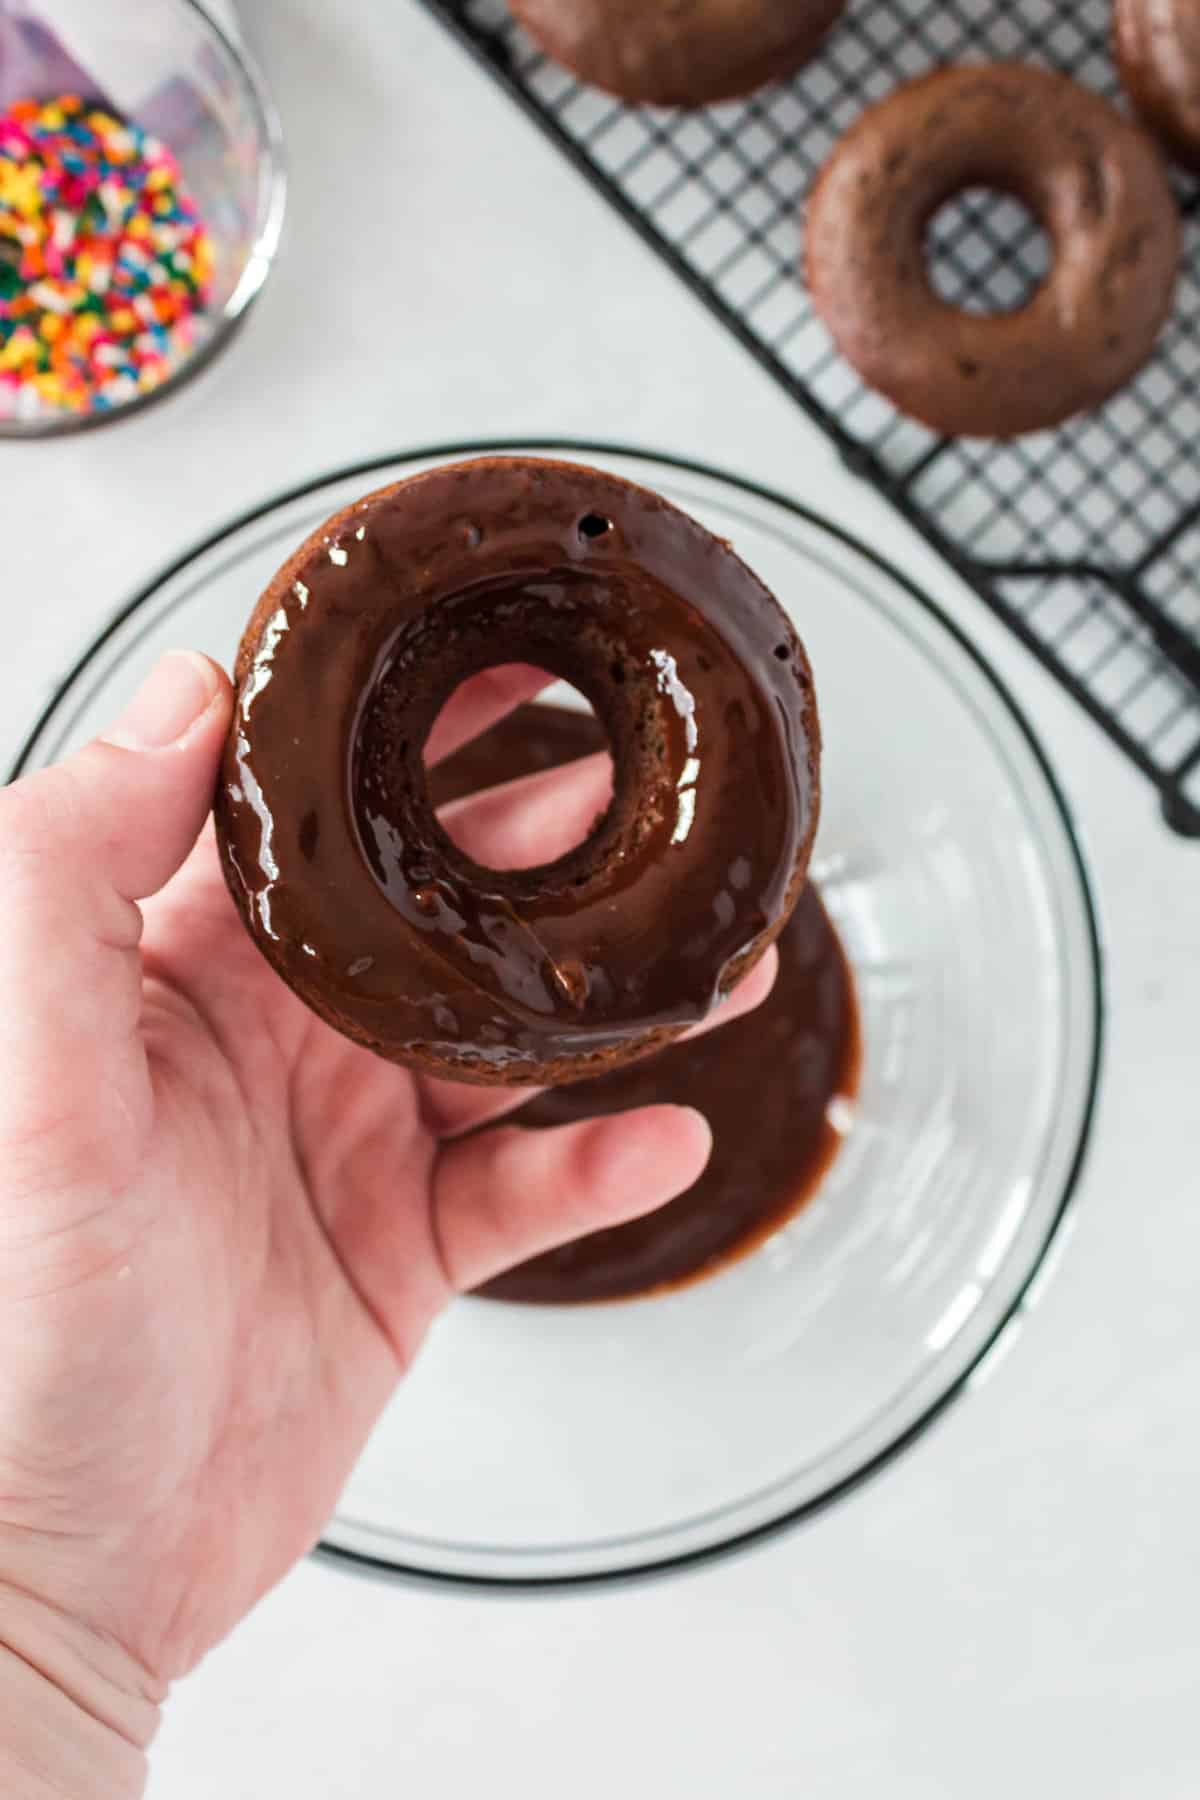 Donut with glaze in a hand.